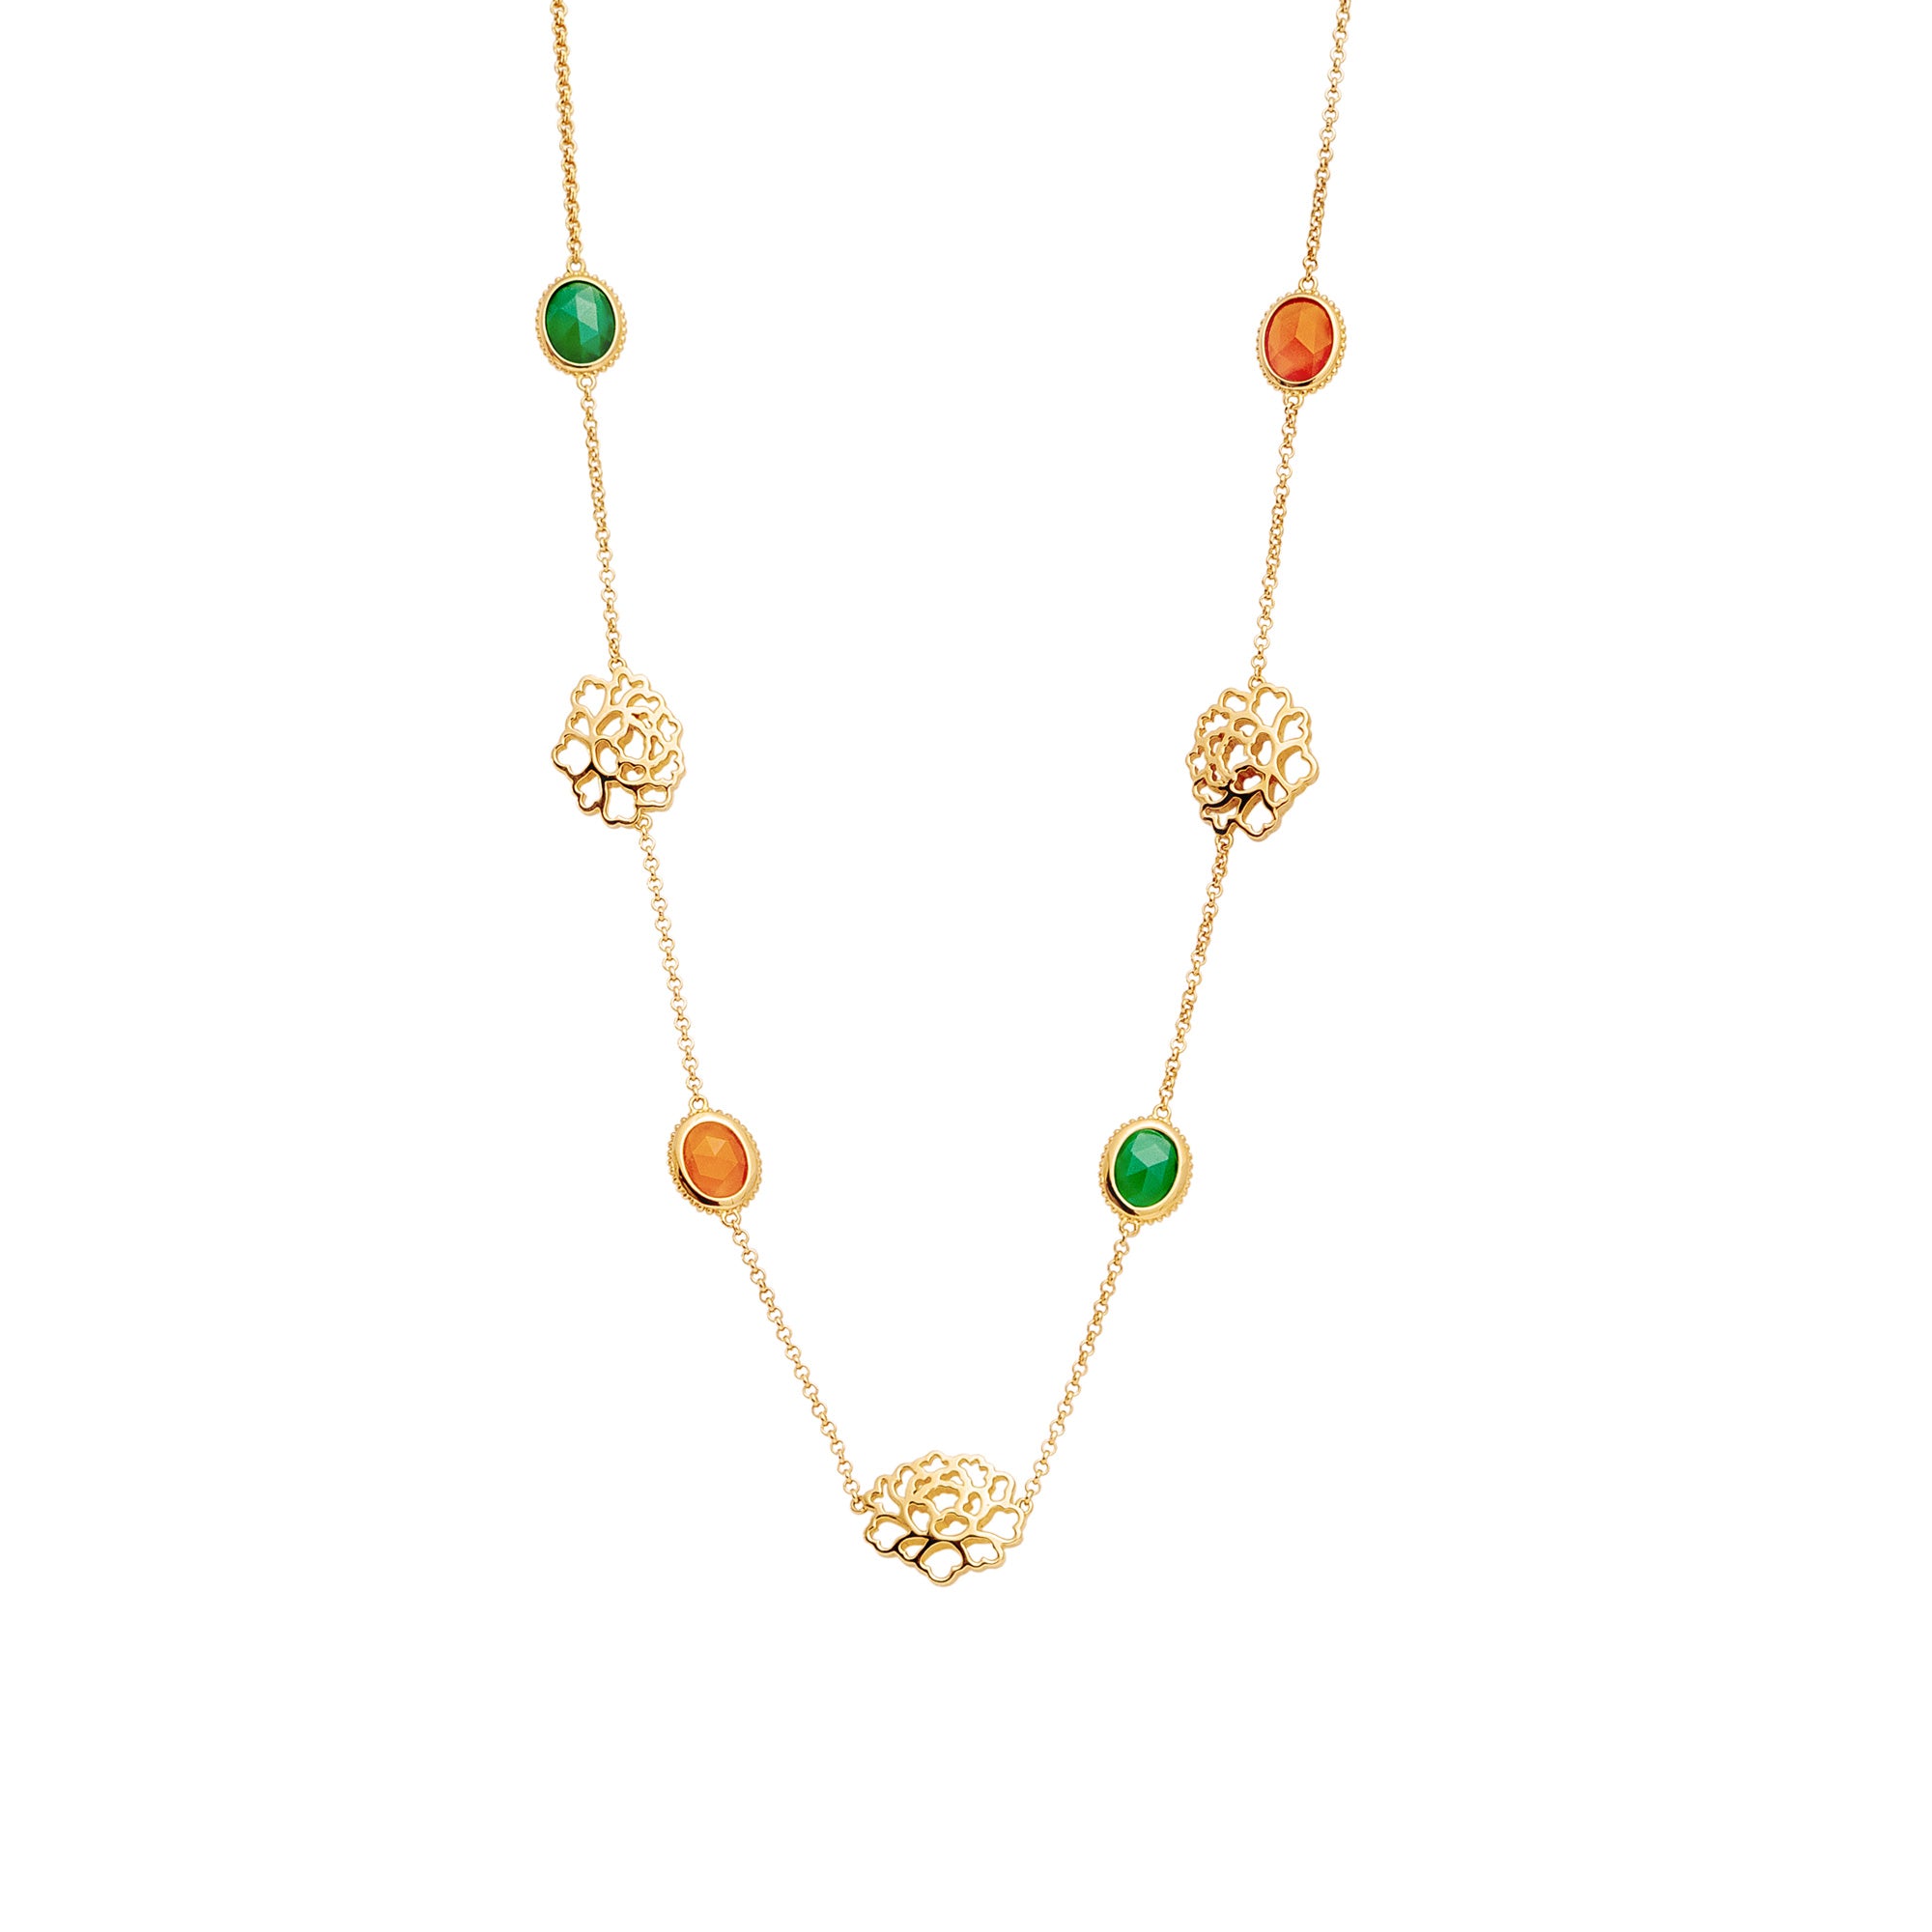 Majestic Tang Peony Necklace Gold Vermeil | Shen Yun Collections